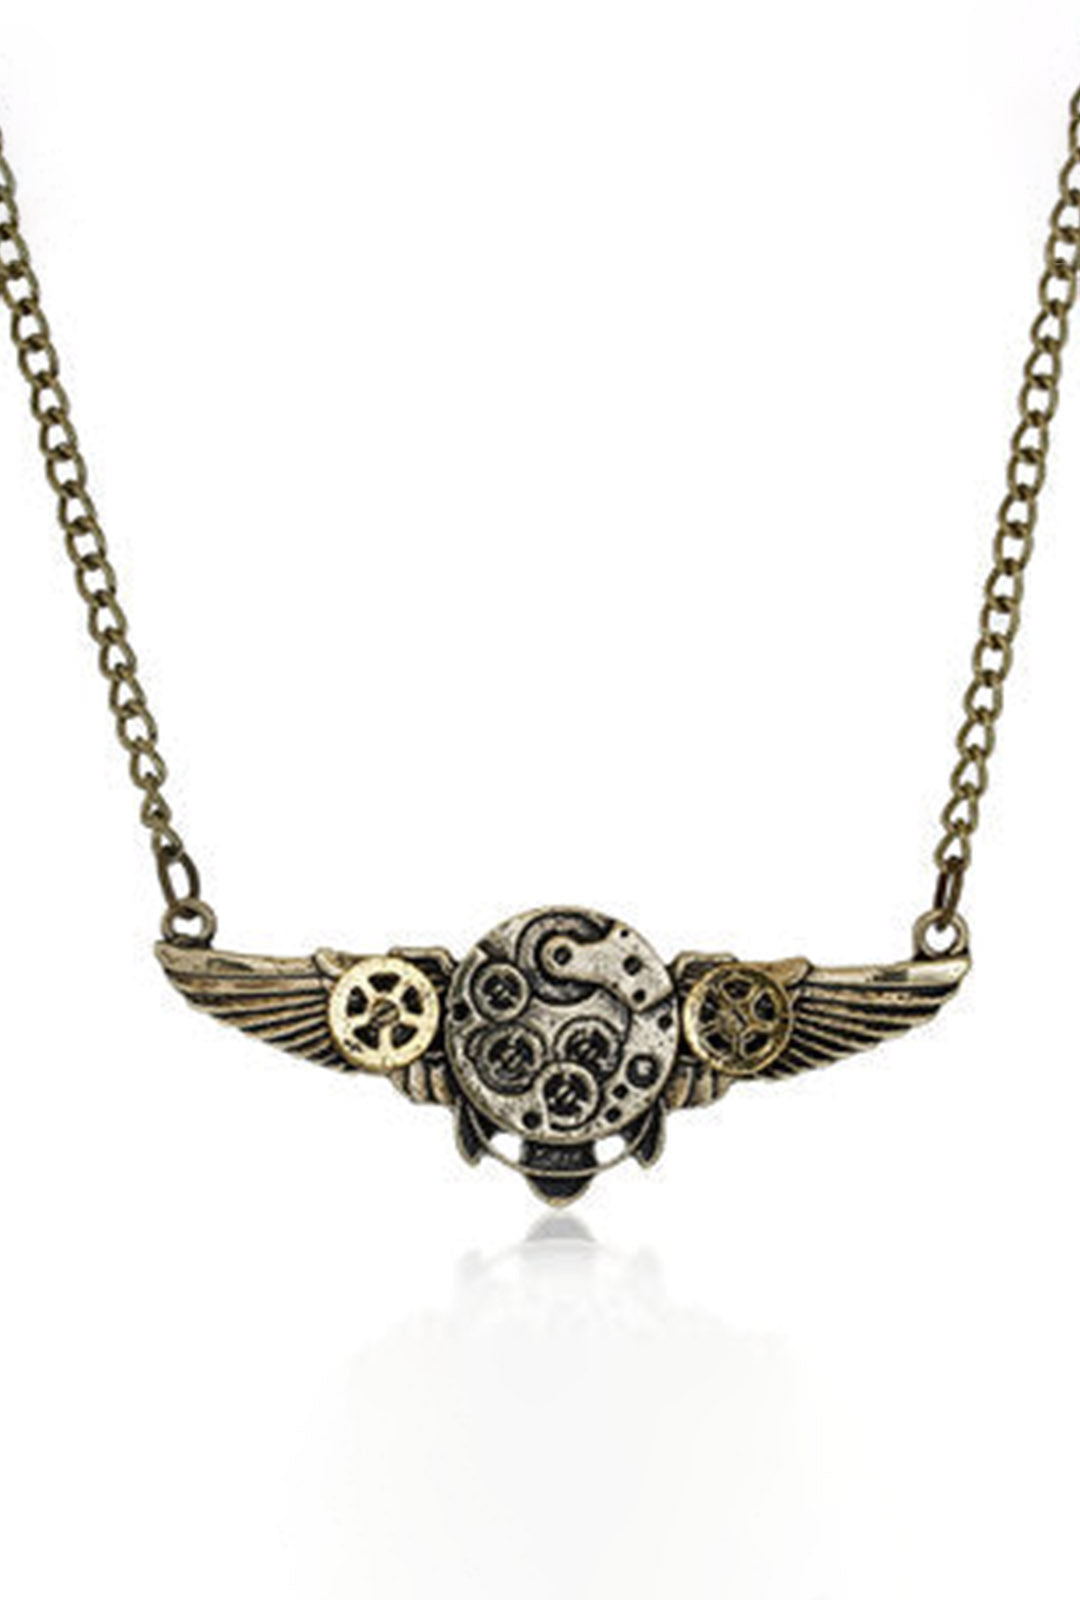 Gold Winged Steampunk Necklace (A)